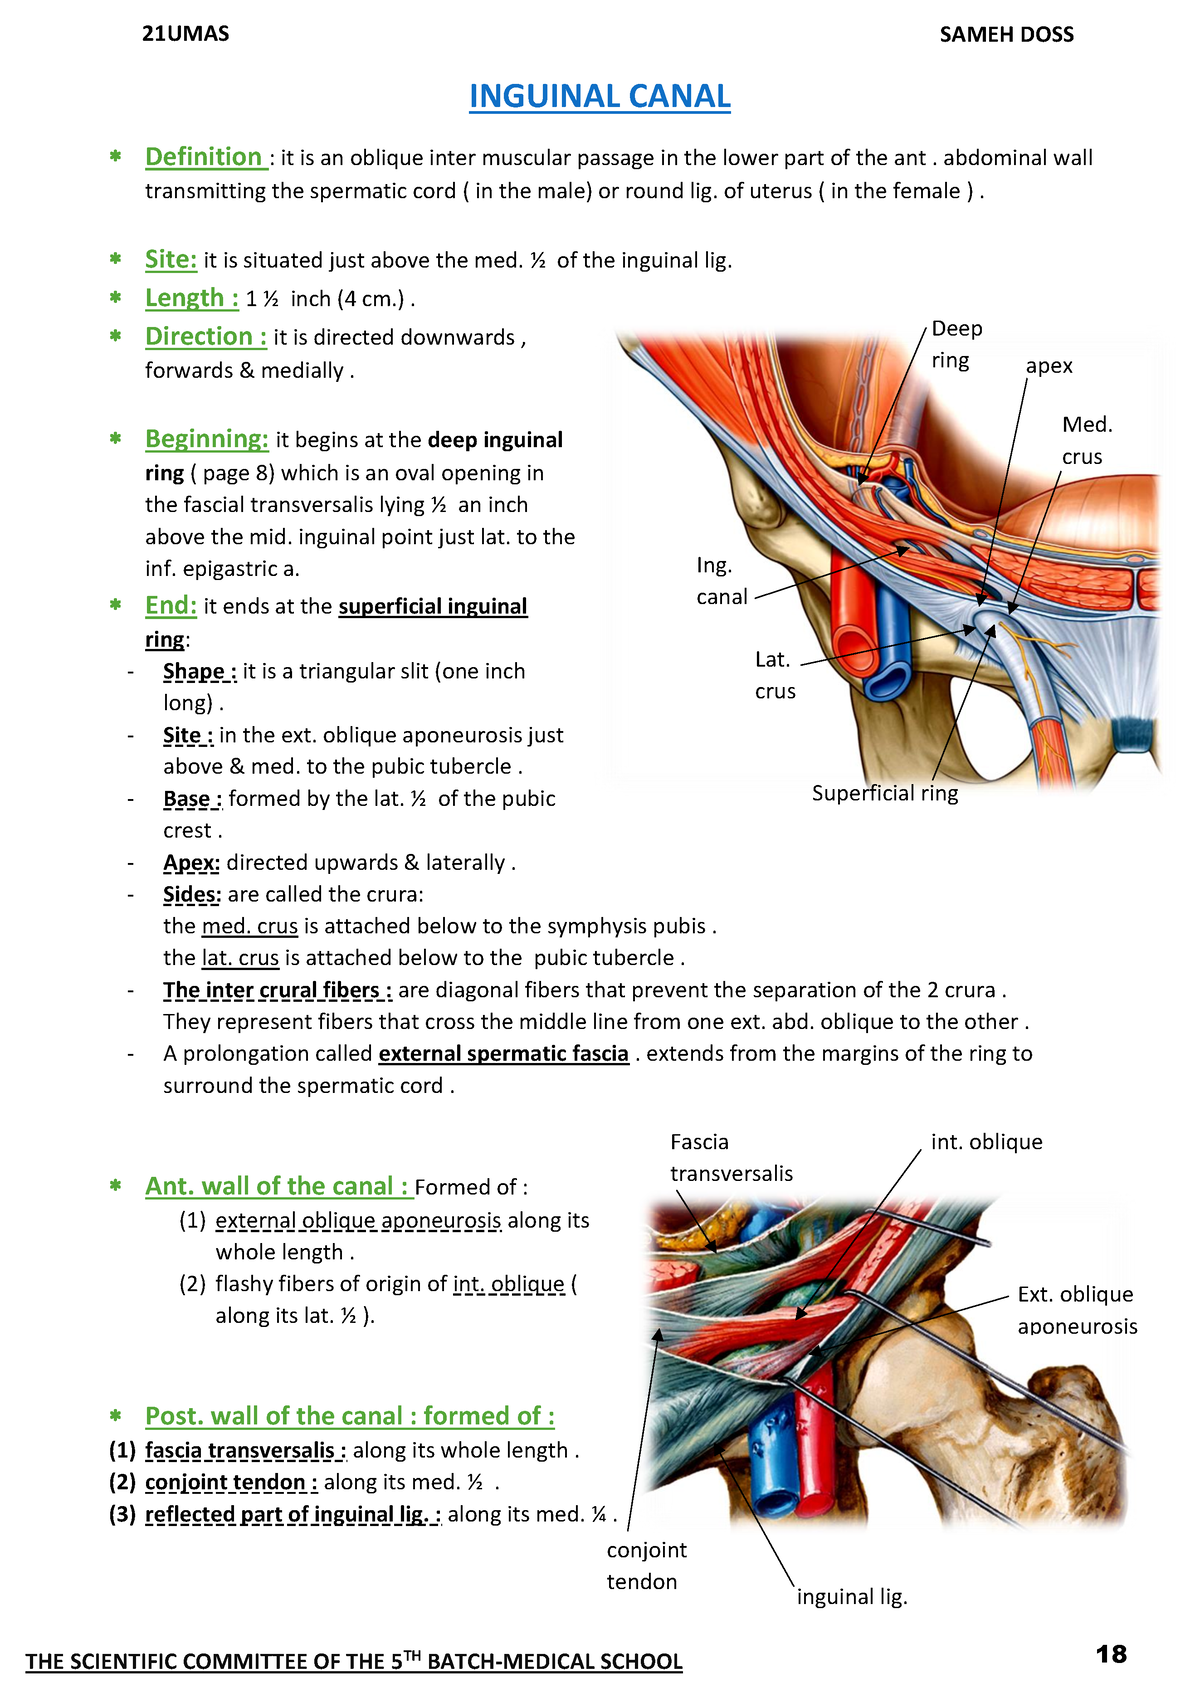 L9 - Inguinal Canal Flashcards | Quizlet